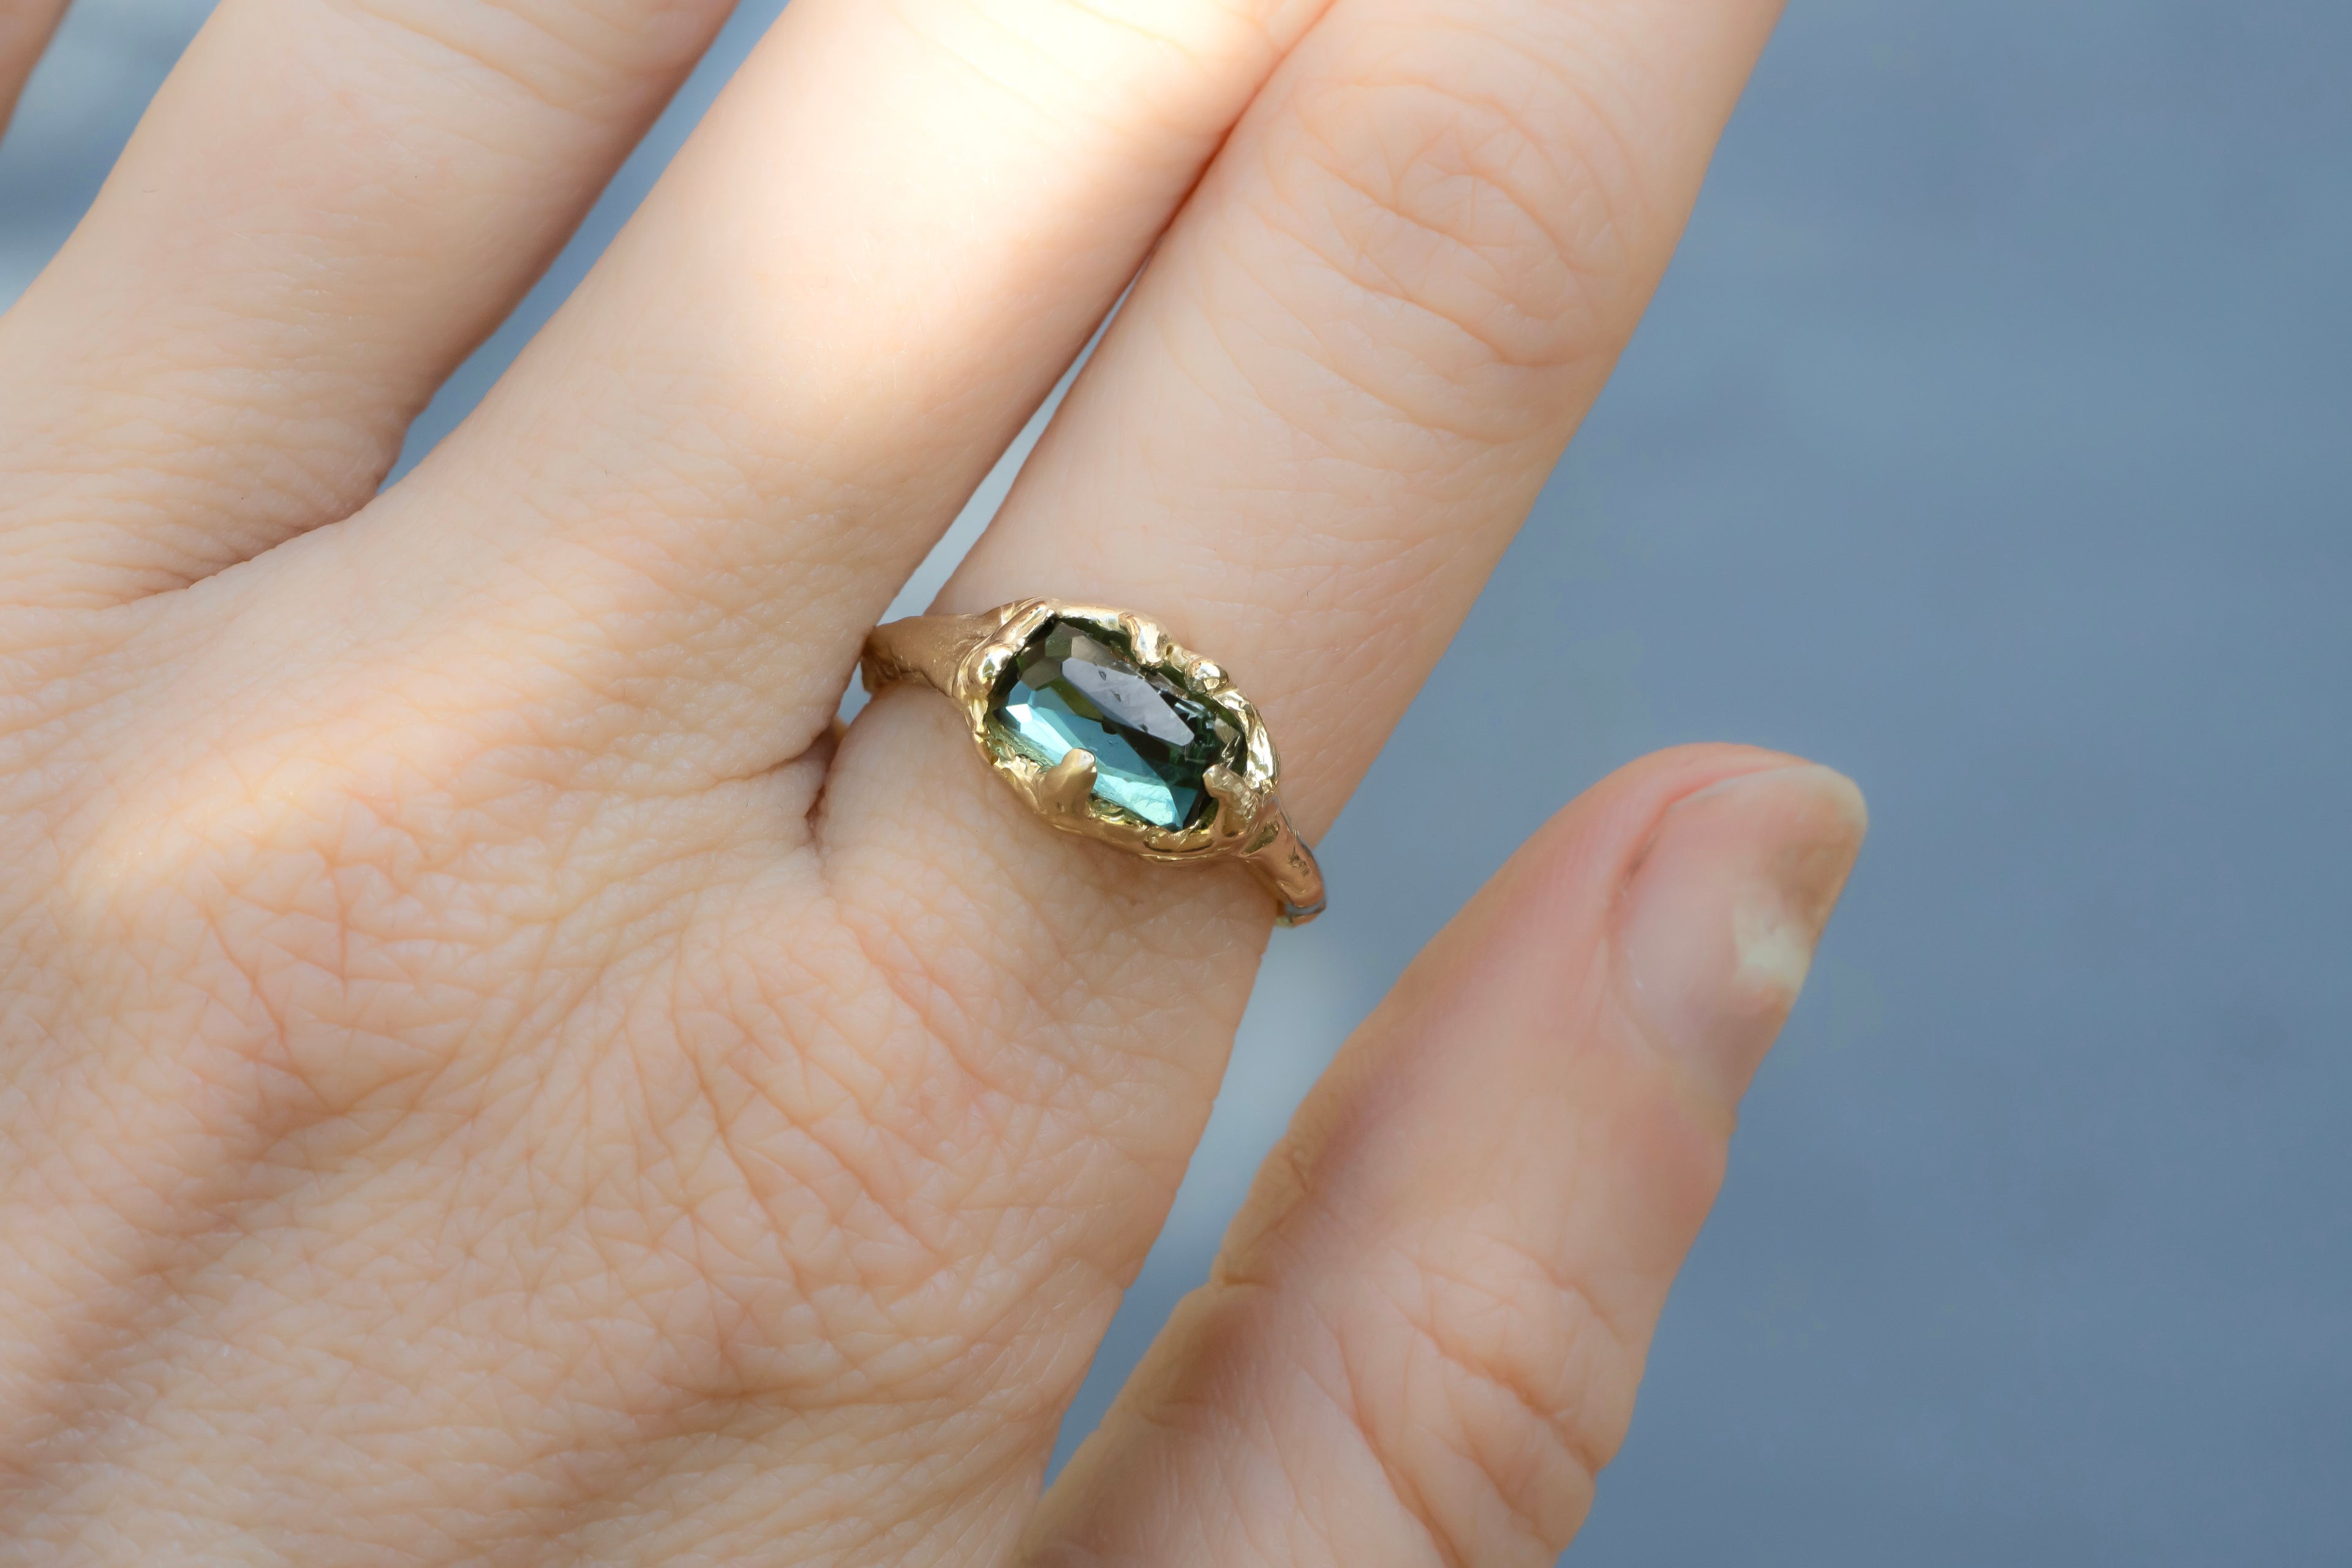 Mermaid Green Tourmaline Ring in 14k Gold Setting - mossNstone